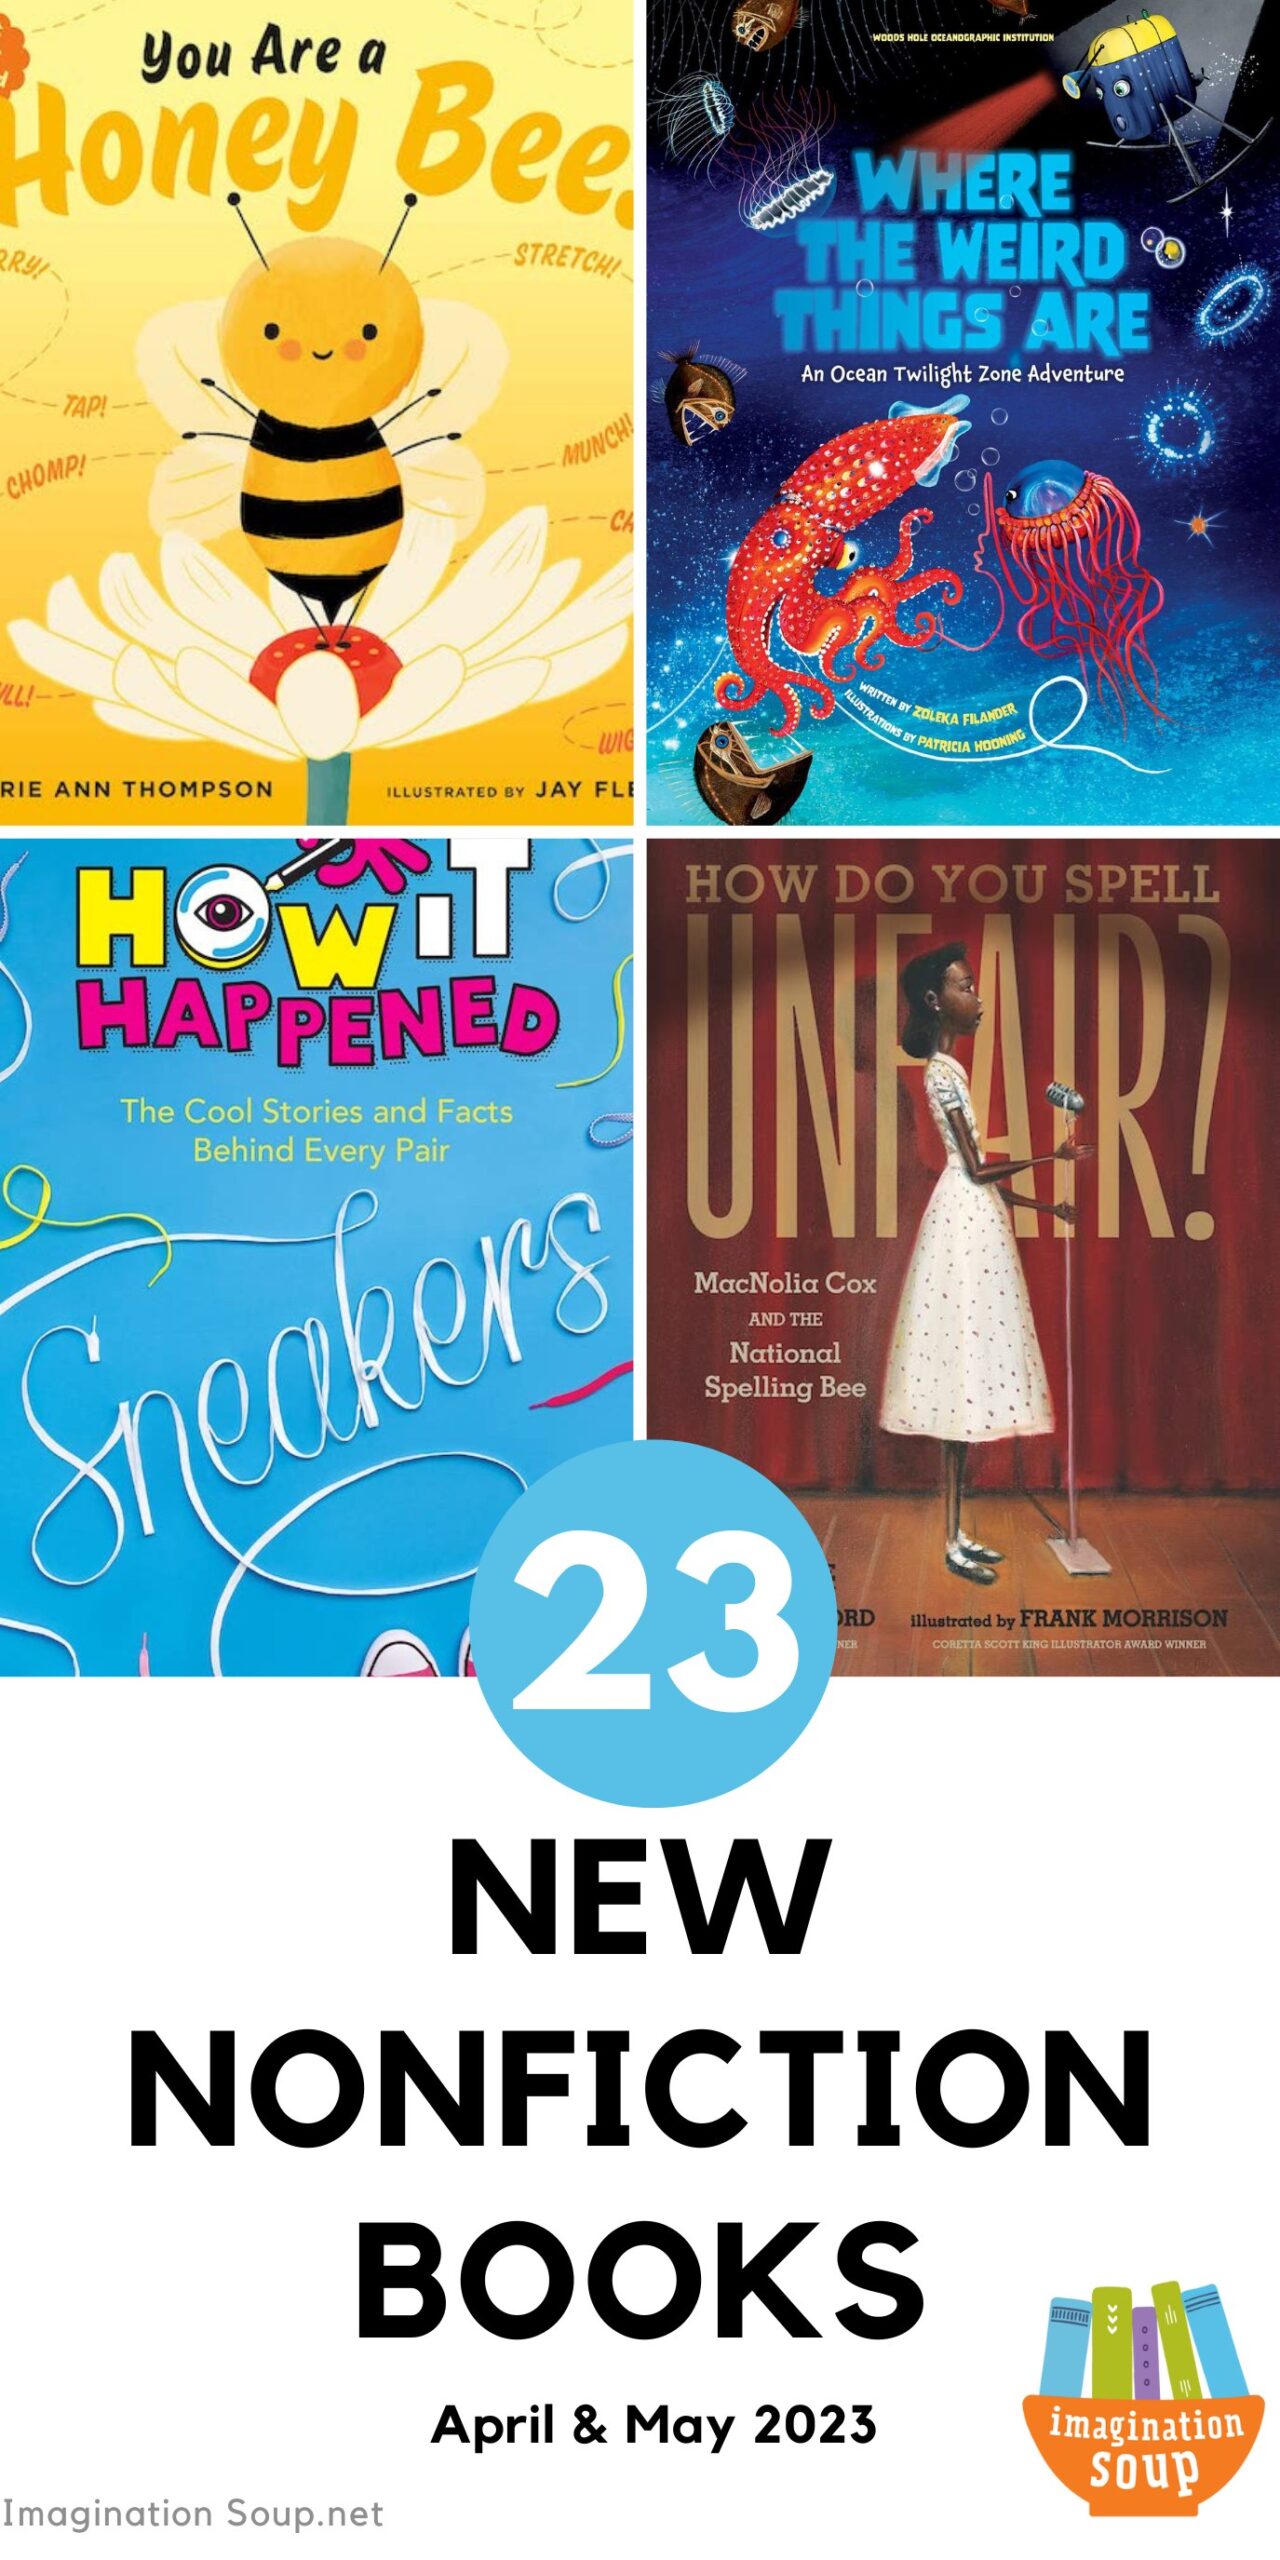 New Nonfiction Books, April and May 2023